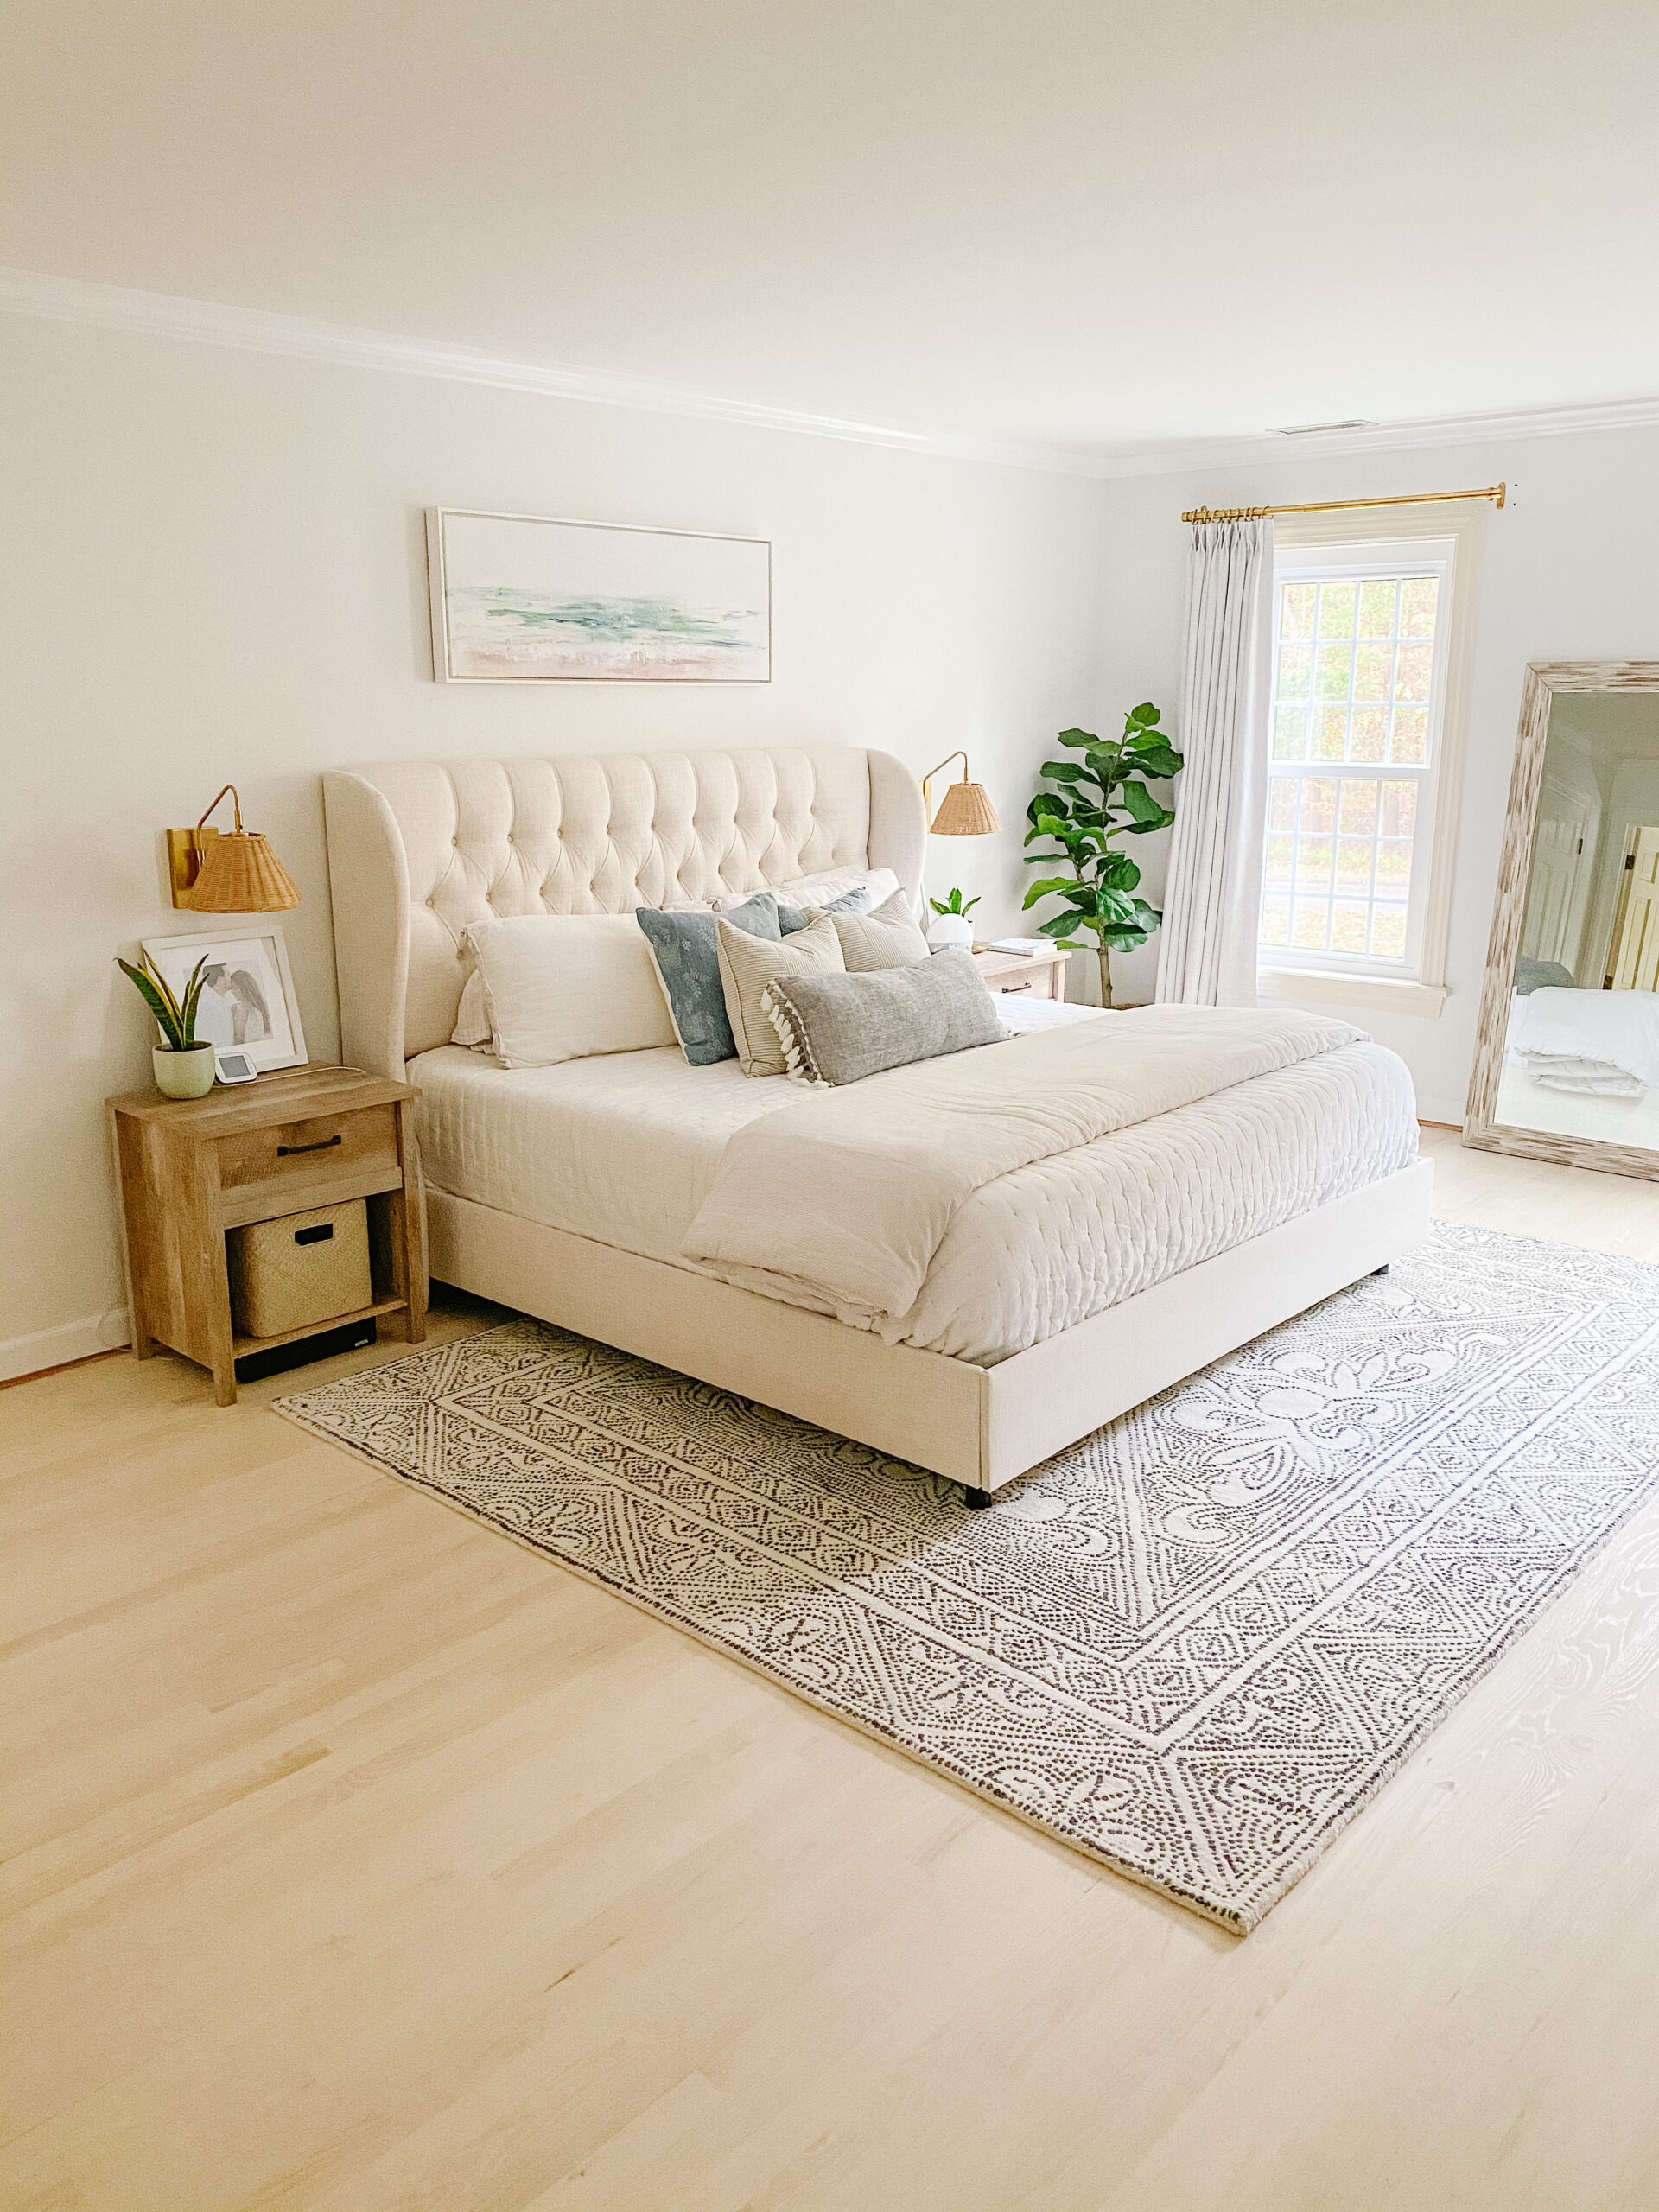 Connecticut life and style blogger Lauren McBride shares the Serena and Lily sale, including items she has in her own home.